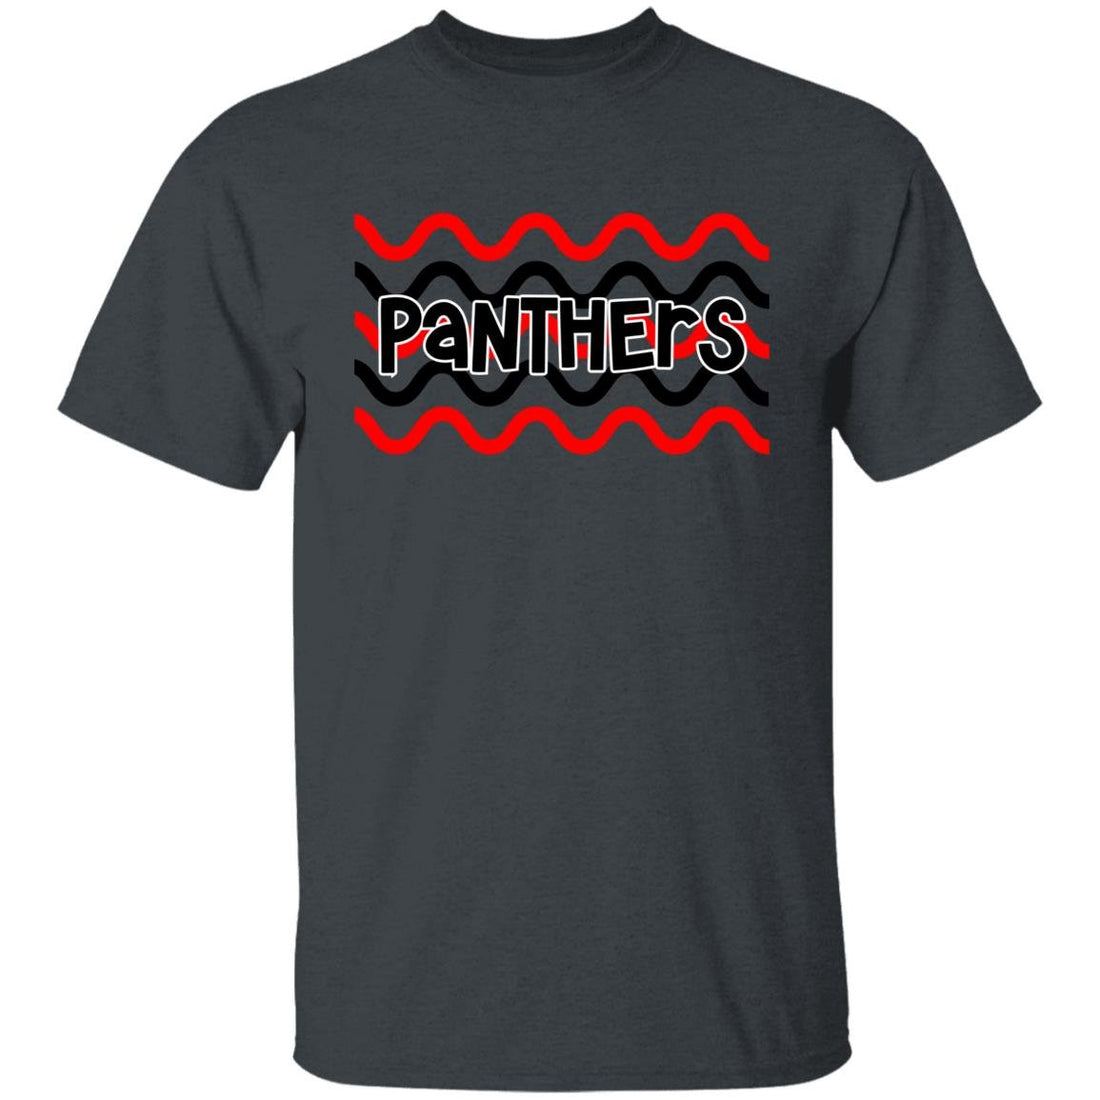 Panthers Waves Youth 5.3 oz 100% Cotton T-Shirt - T-Shirts - Positively Sassy - Panthers Waves Youth 5.3 oz 100% Cotton T-Shirt